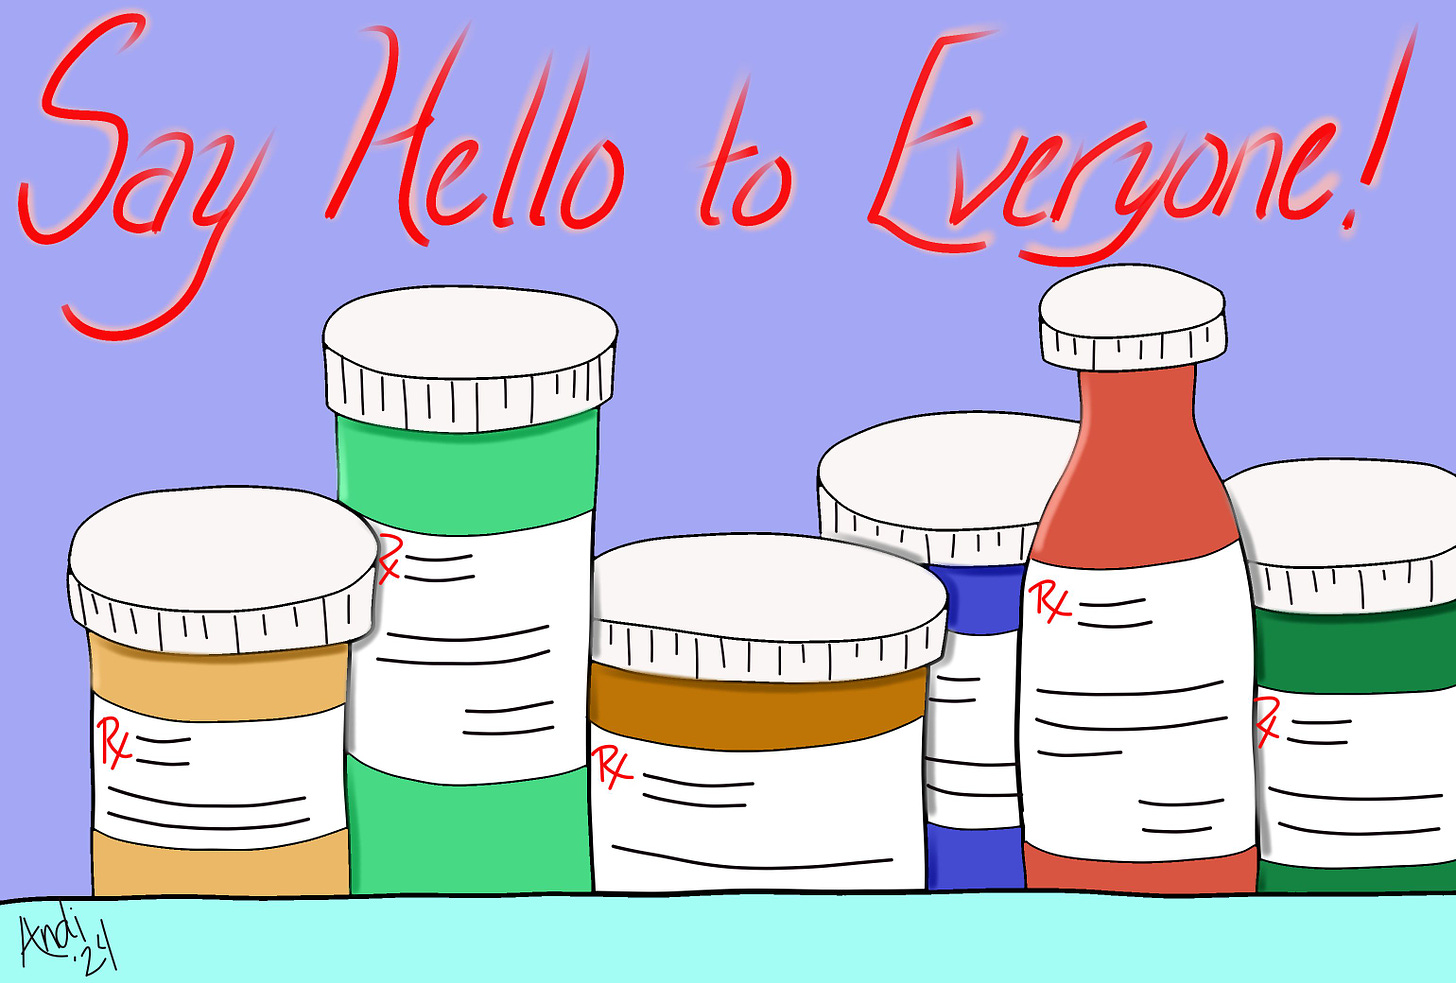 "Say Hello to Everyone!" postcard featuring an assortment of pill and medication bottles